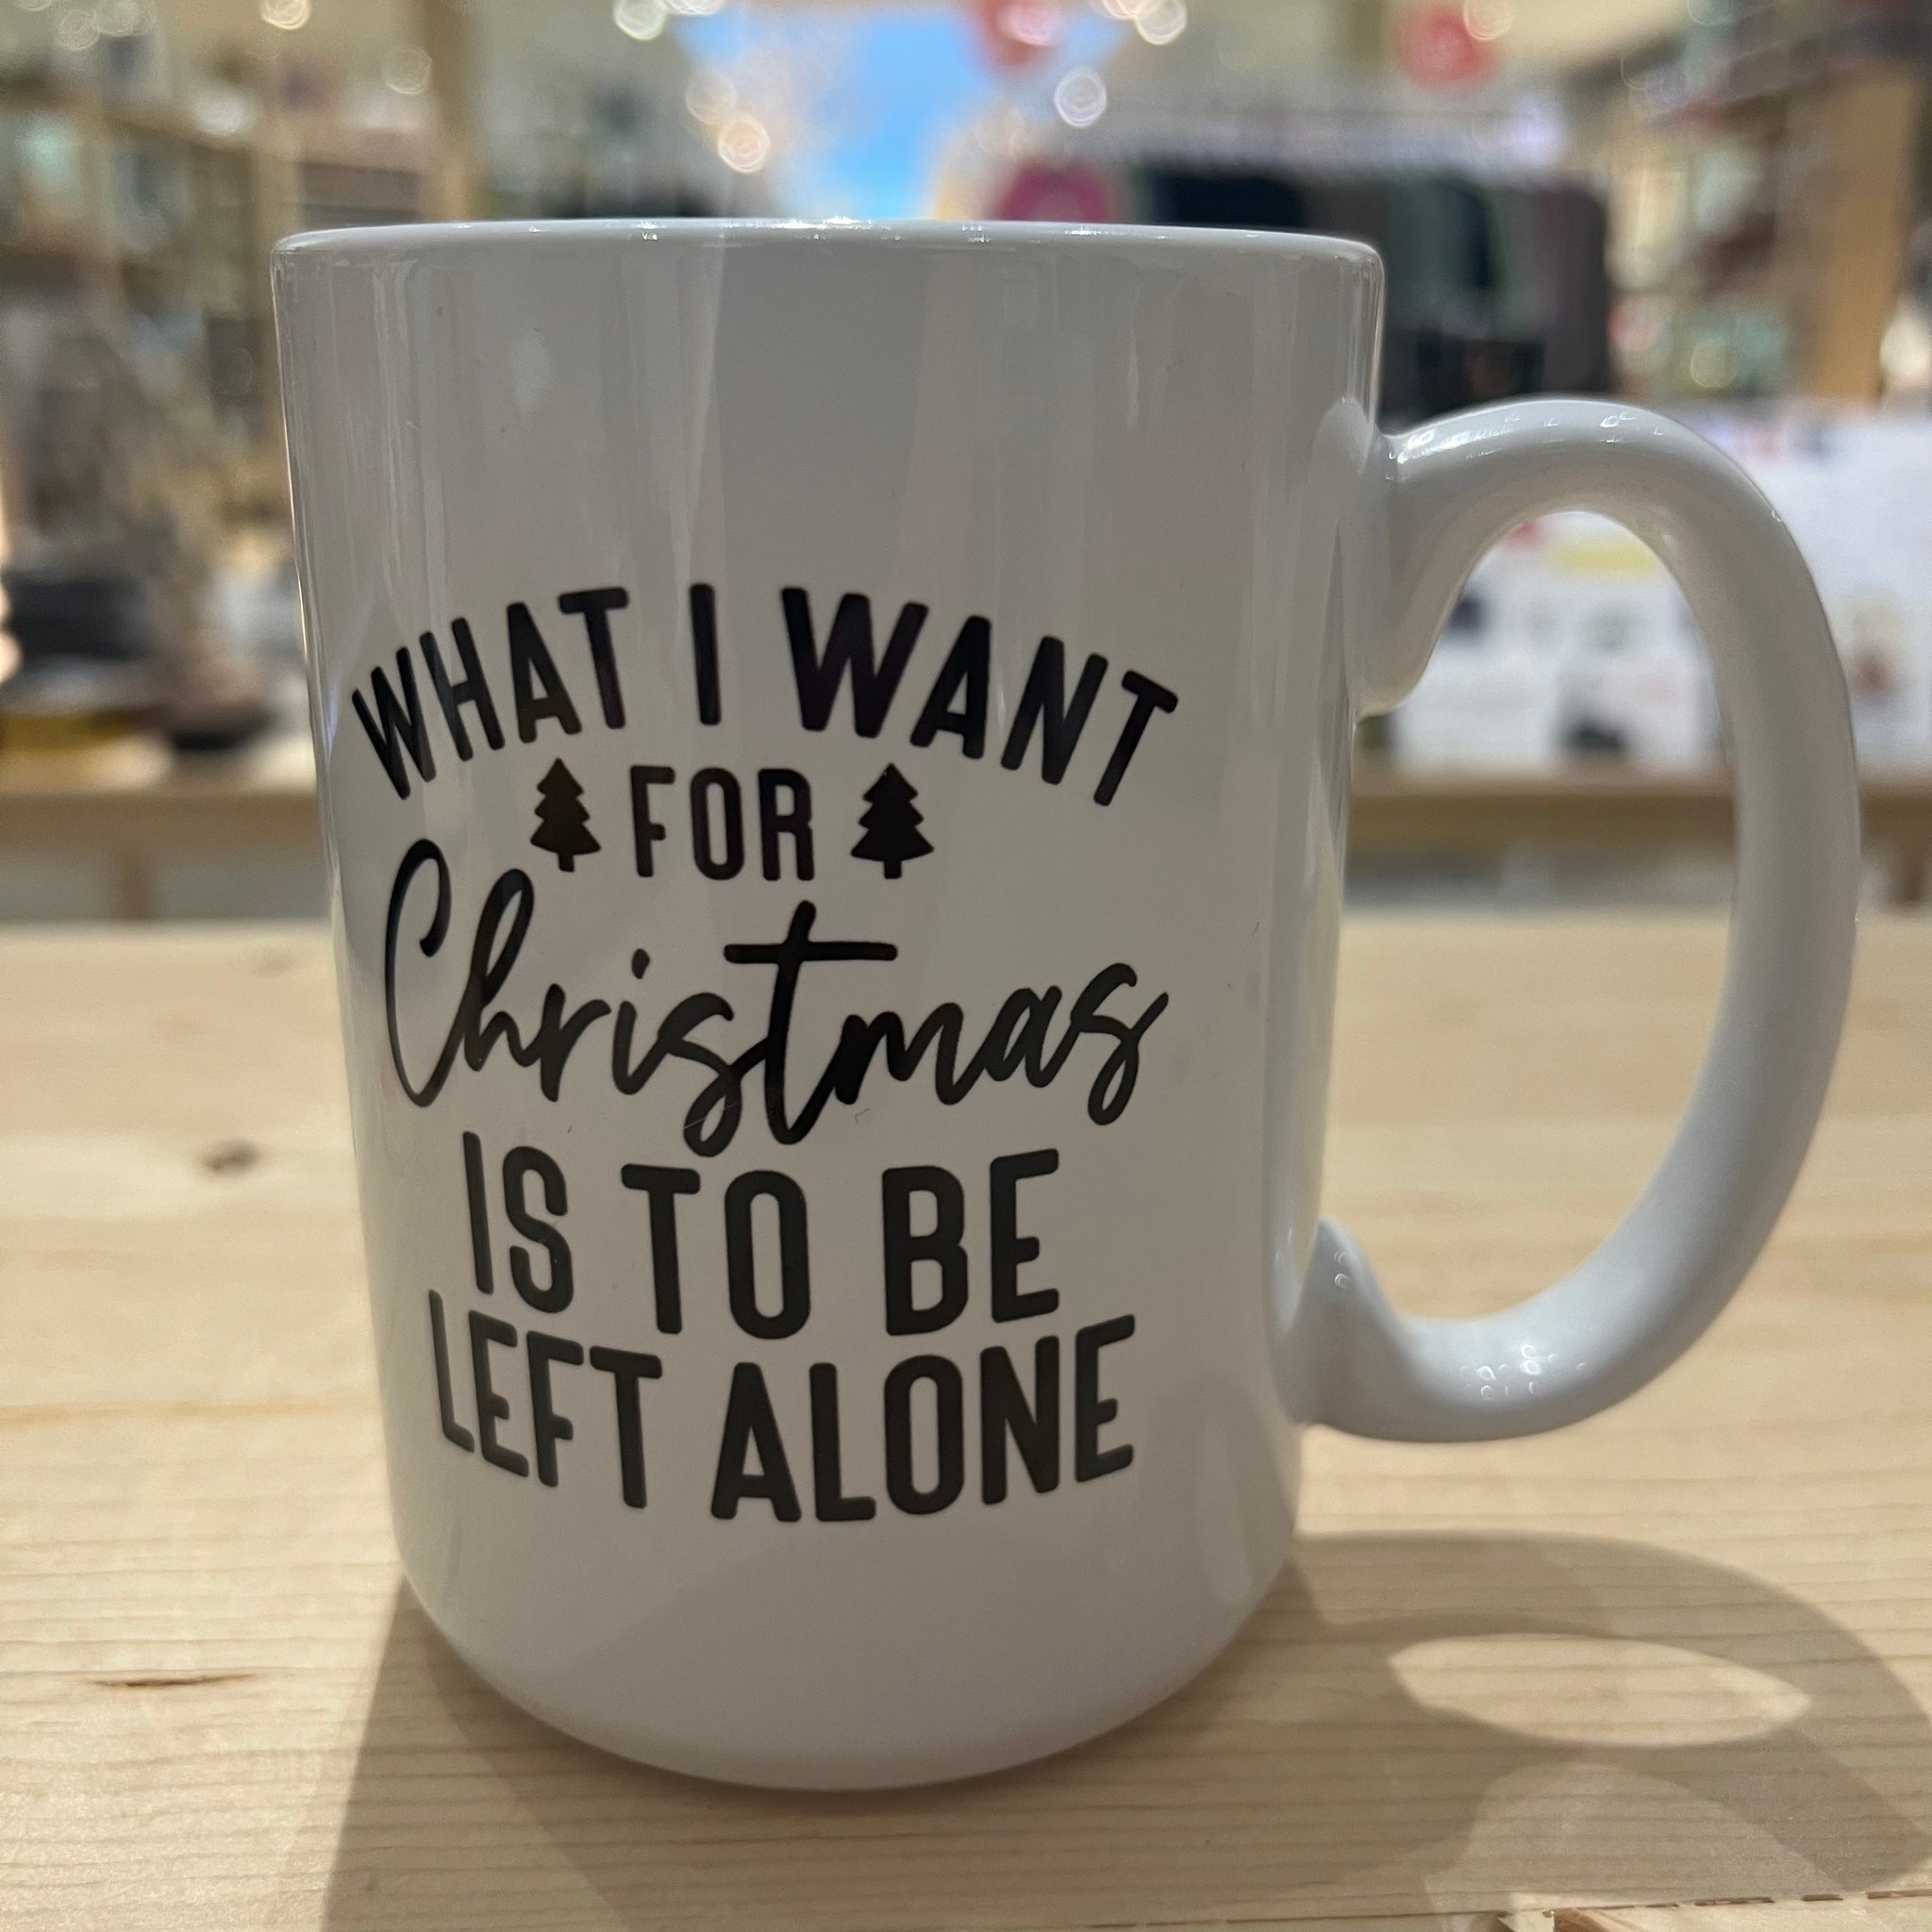 What I Want for Christmas is to Be Left Alone